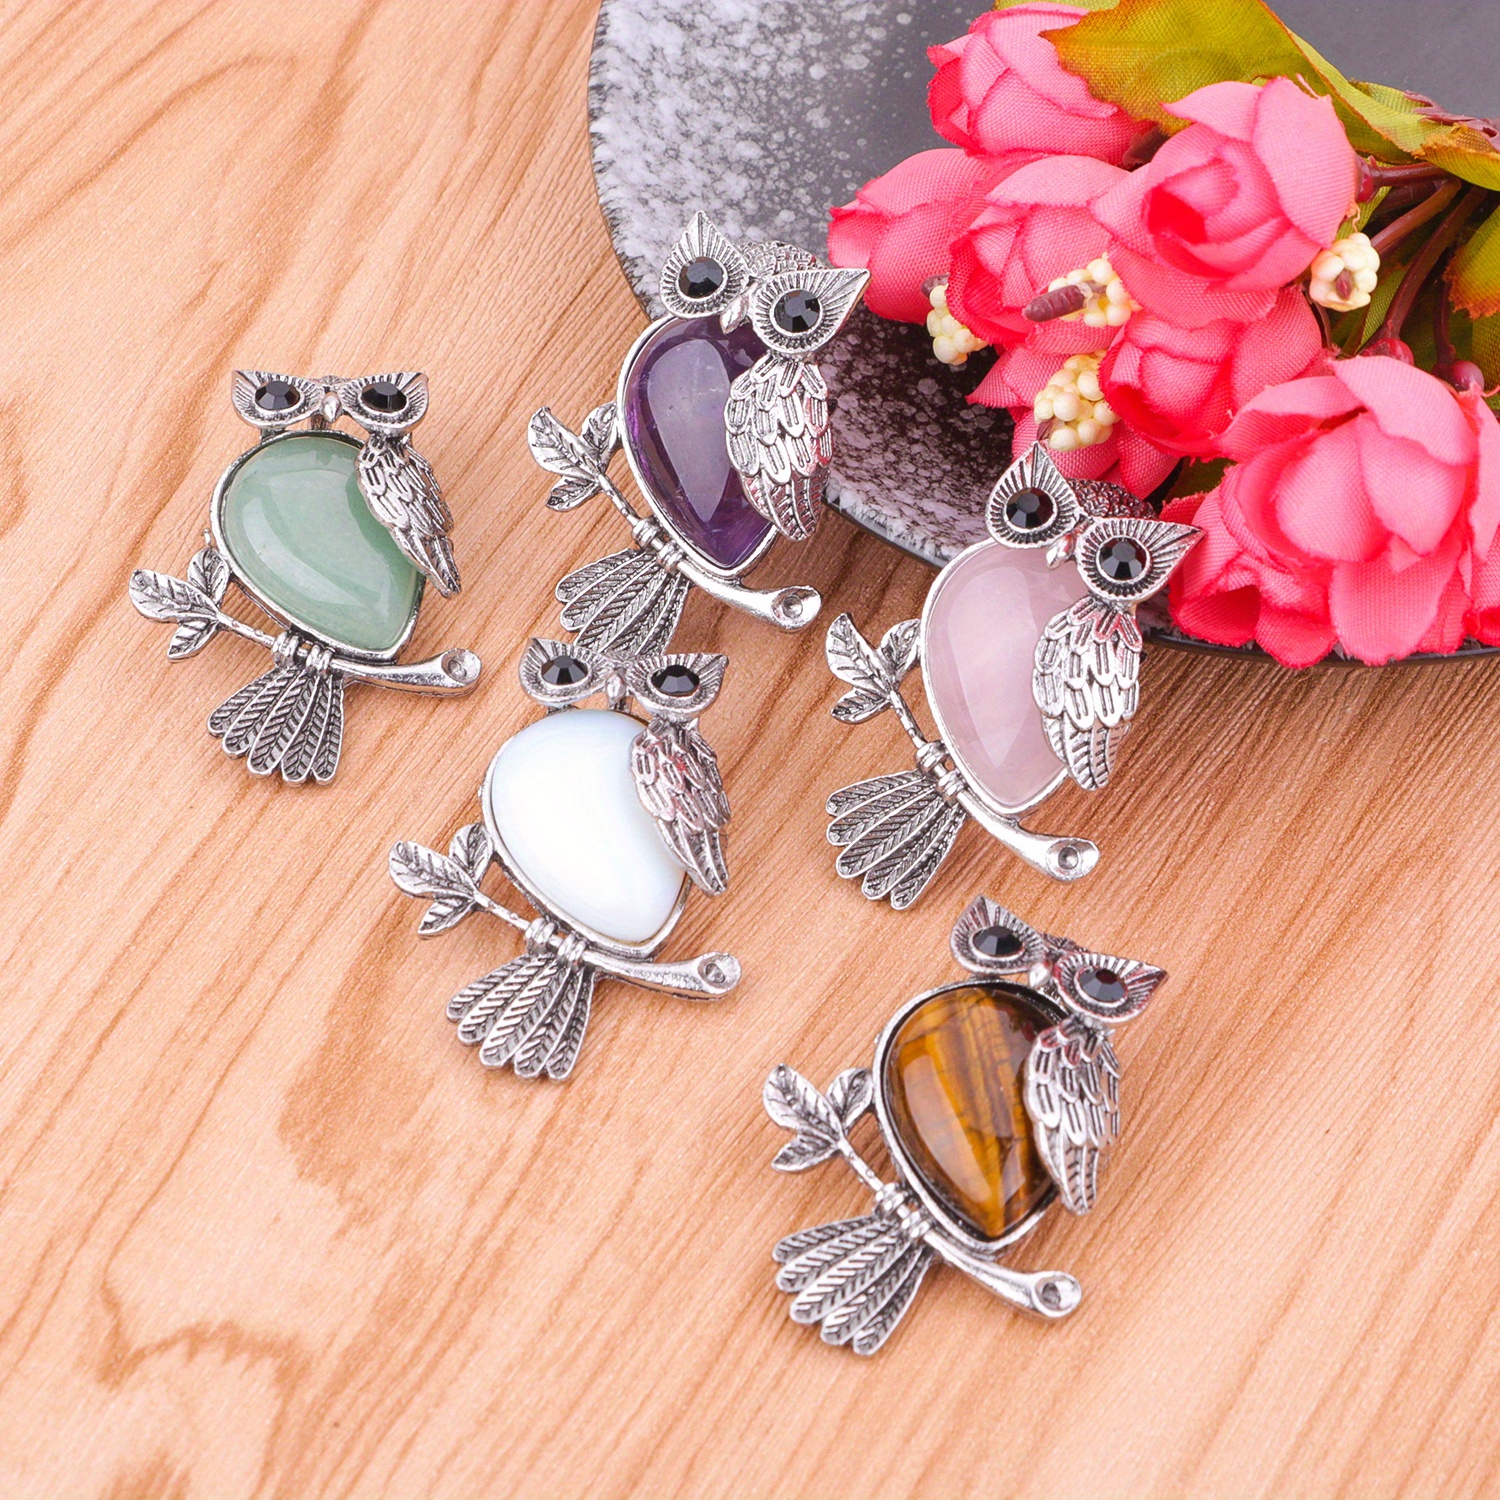 1pc Owl Necklace Therapeutic Crystal Stone Pendant Necklace For Women Men  Natural Amethyst Rose Quartz Gem Aura Spiritual Energy Lucky Jewelry, Check Out Today's Deals Now